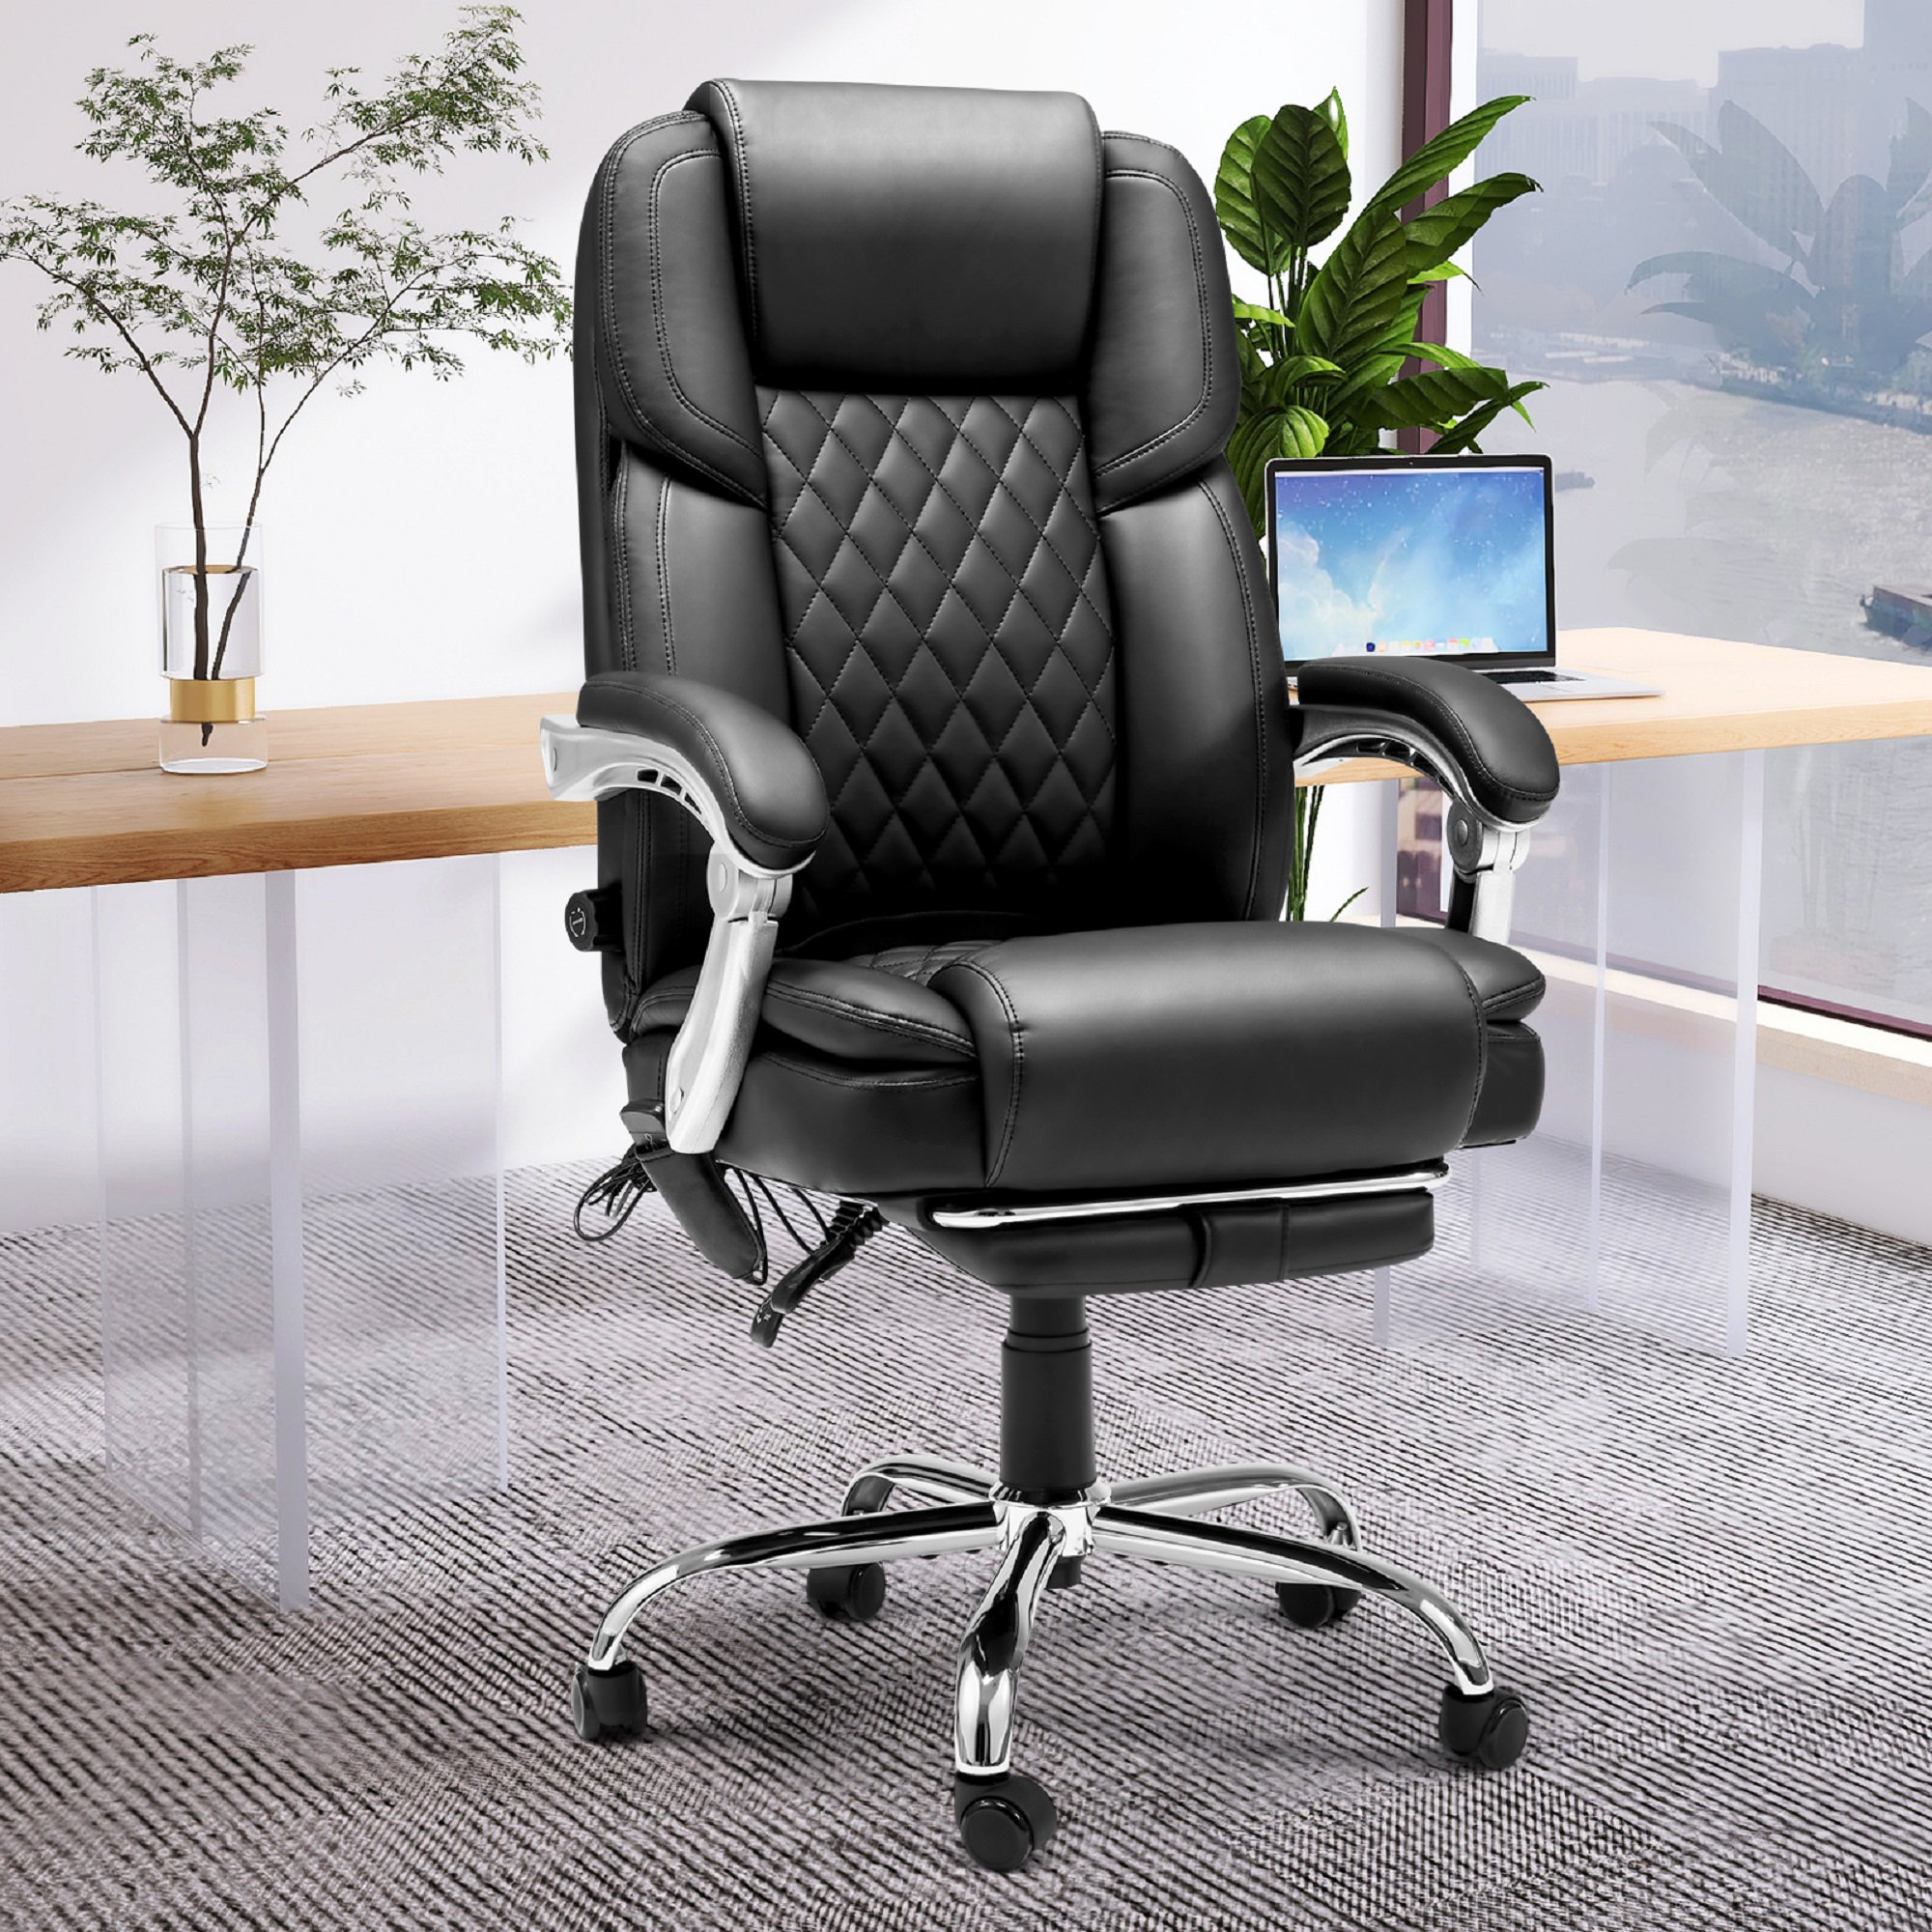 Lumbar Support Chair Recliner Cushion Pressure Relief Back Cushion With  Thicken Ergonomics For Couch Sofa Car Computer Desk - AliExpress